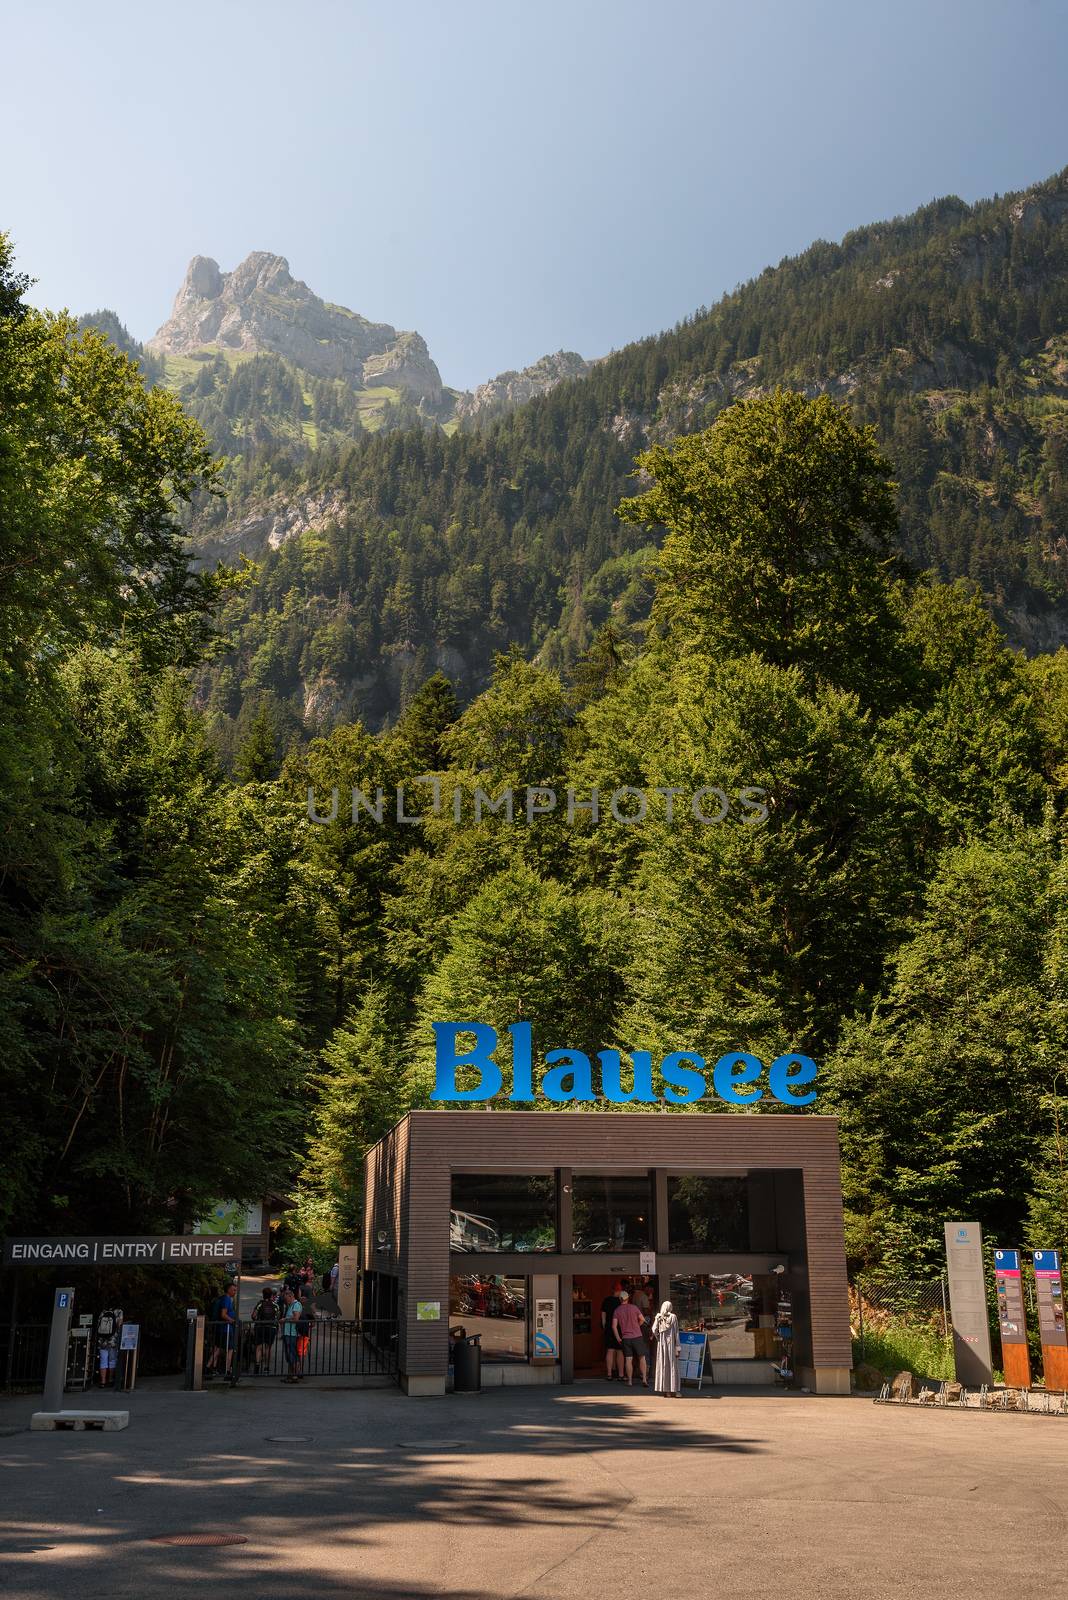 Blausee Lake, Switzerland - July 23, 2019 : Tourists entering the Blausee Lake located in the Kander valley above Kandergrund.